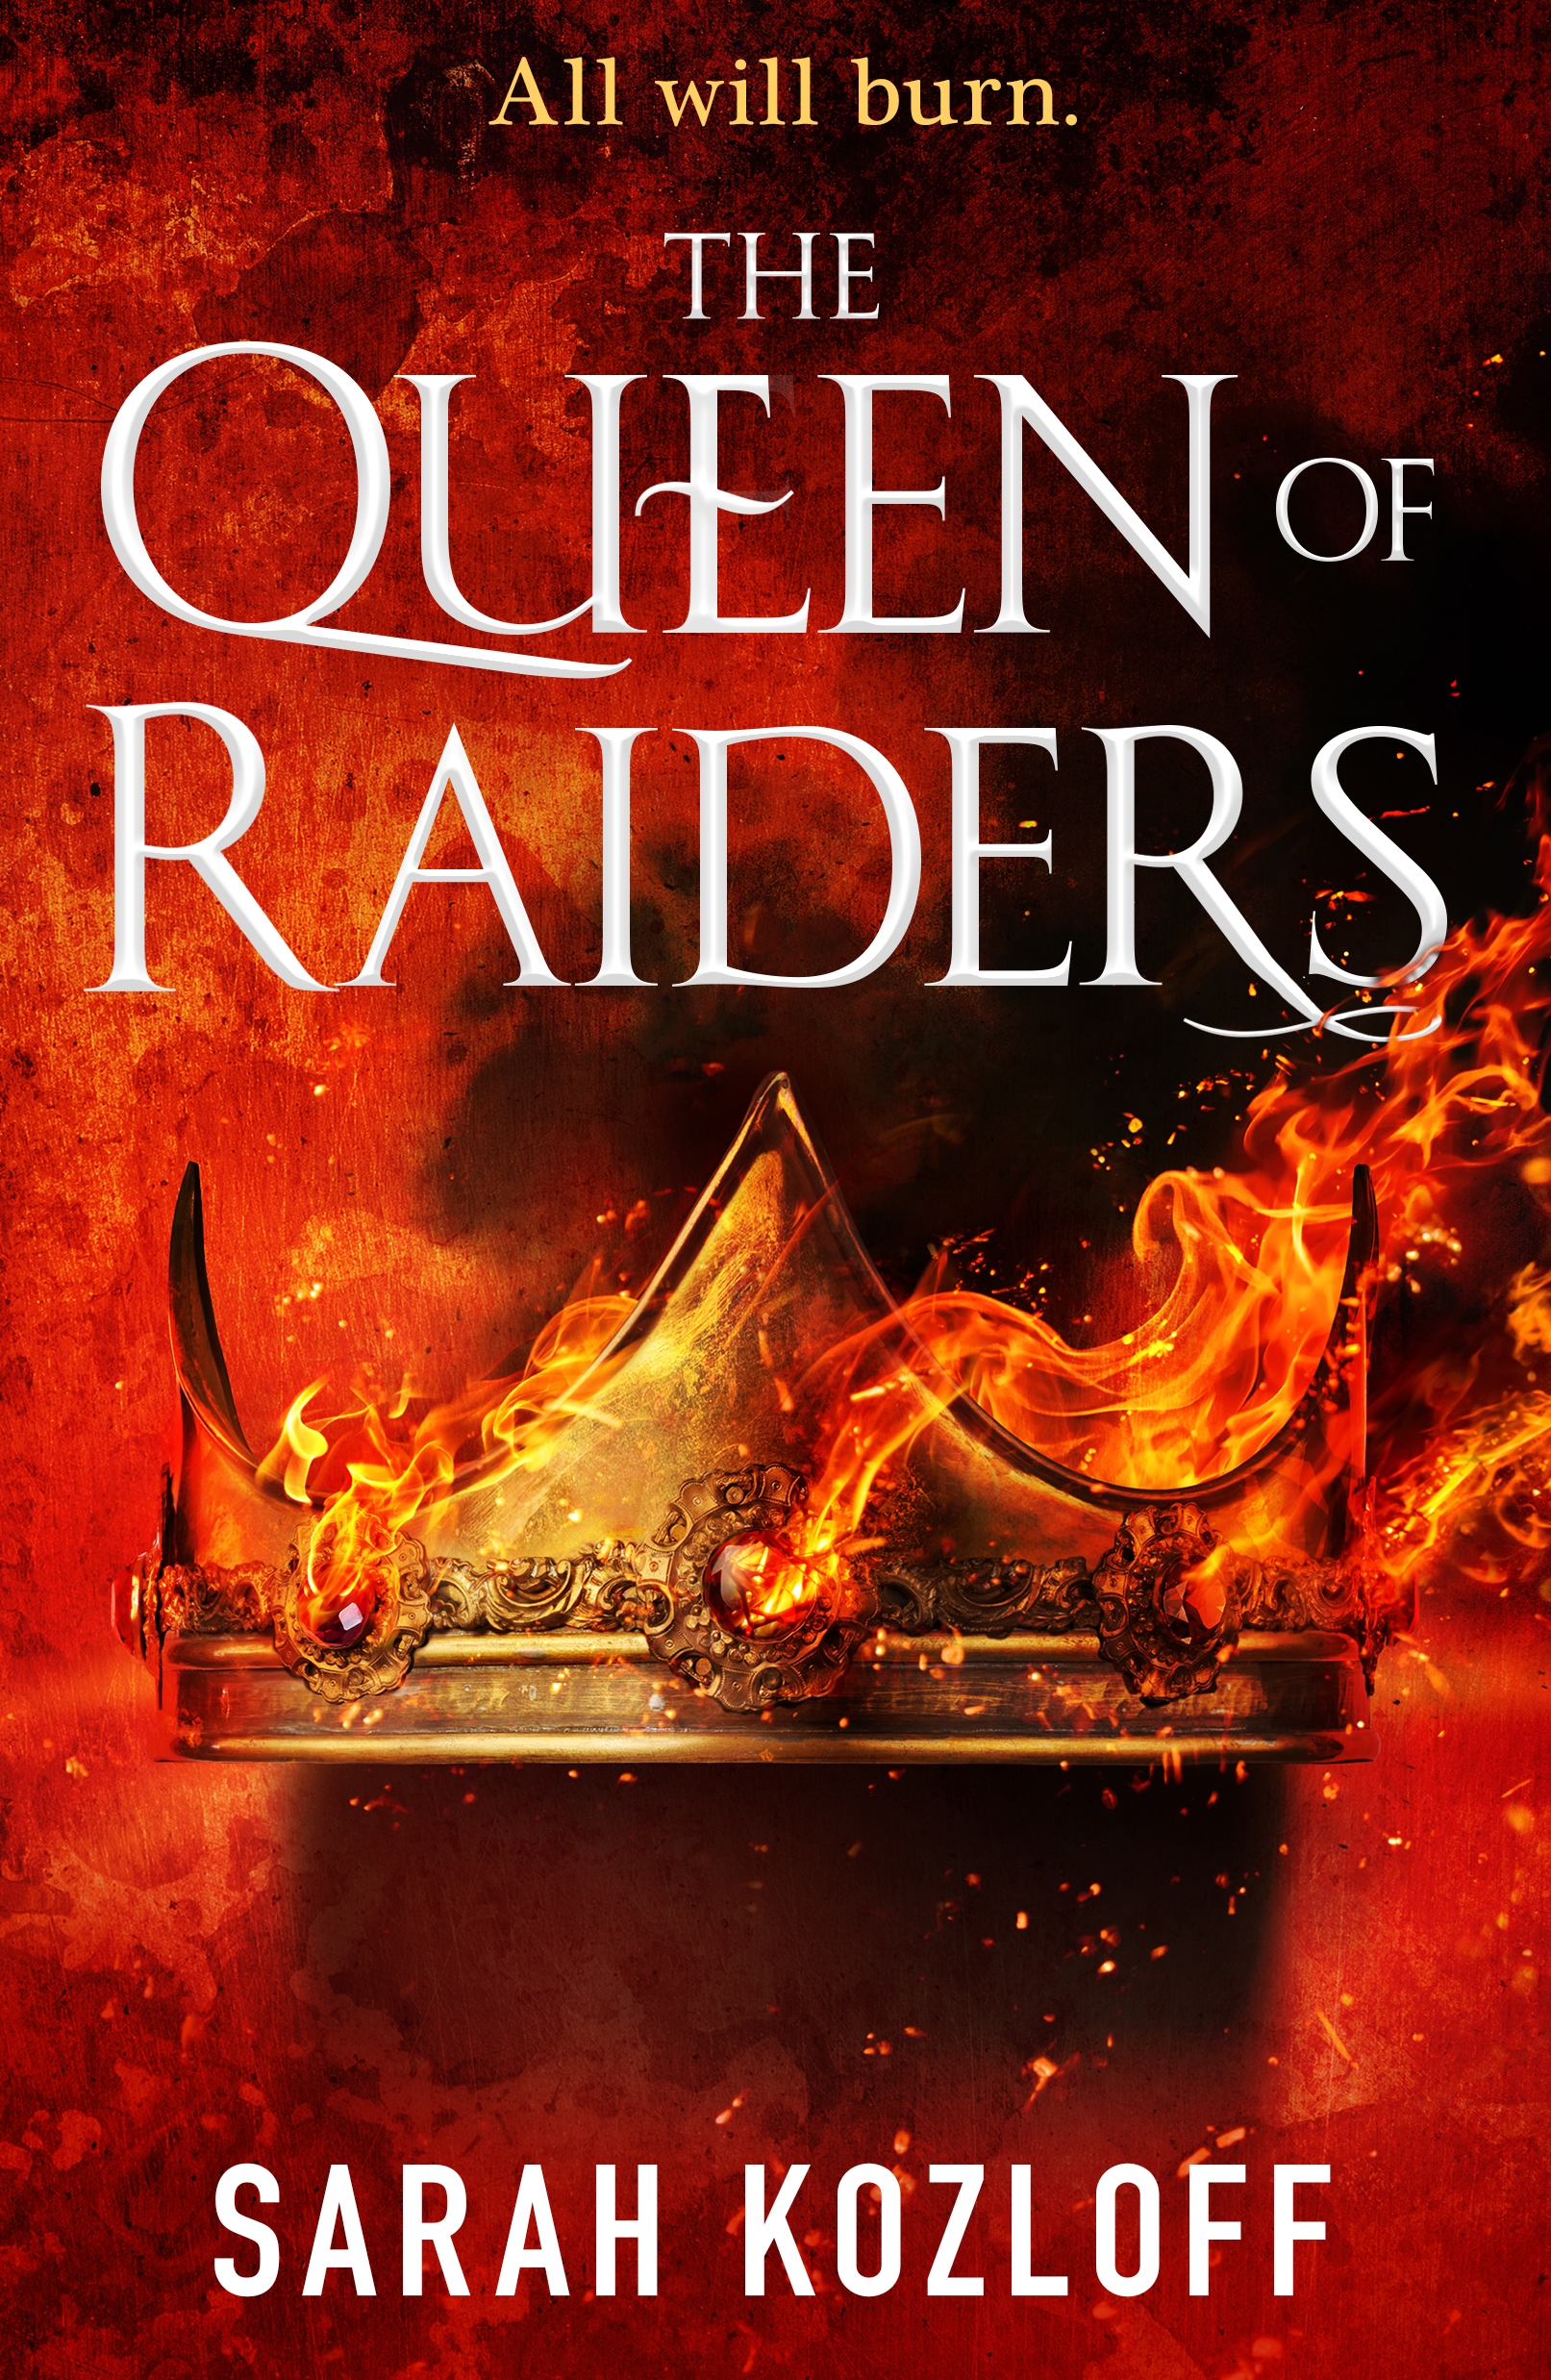 The Queen of Raiders by Sarah Kozloff